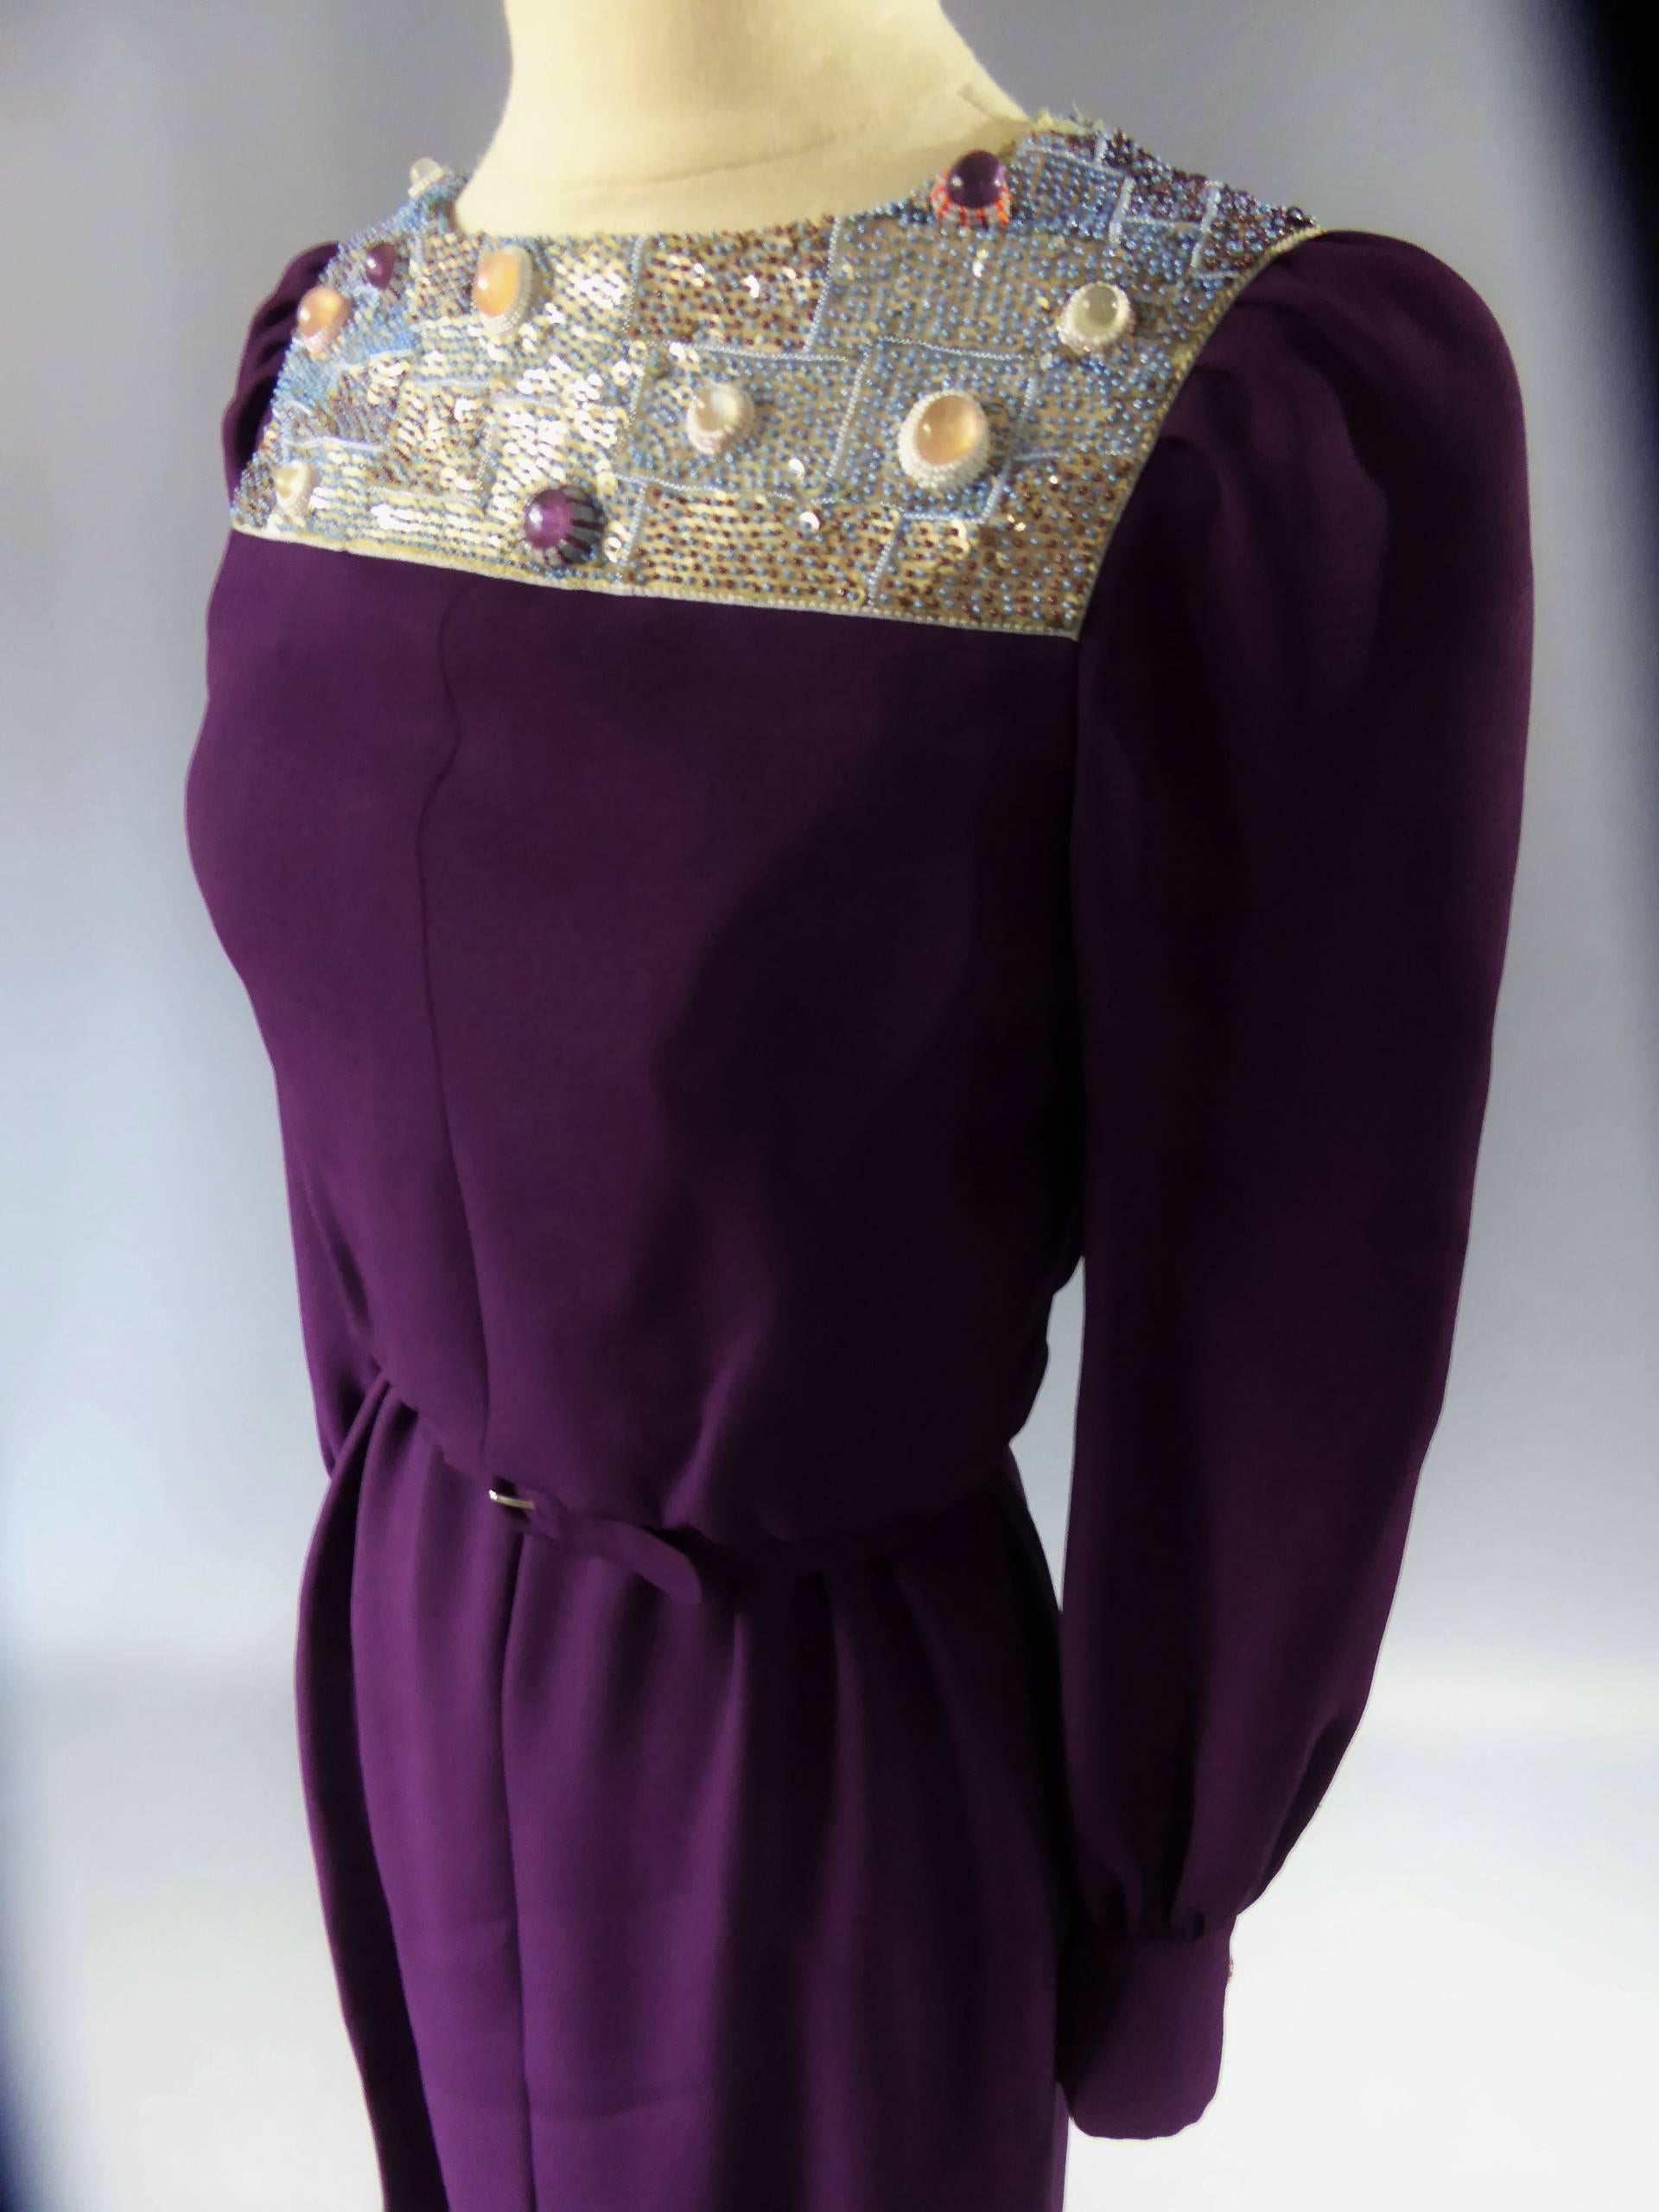 Circa 1970/1975
France

Stunning long dress in crepe silk purple labelled Nina Ricci collection Jeune Femme dating to the 70s. Monastic and futuristic taste fashionable during the 70s thanks to Pierre Cardin or Paco Rabanne. Buttons on the handles